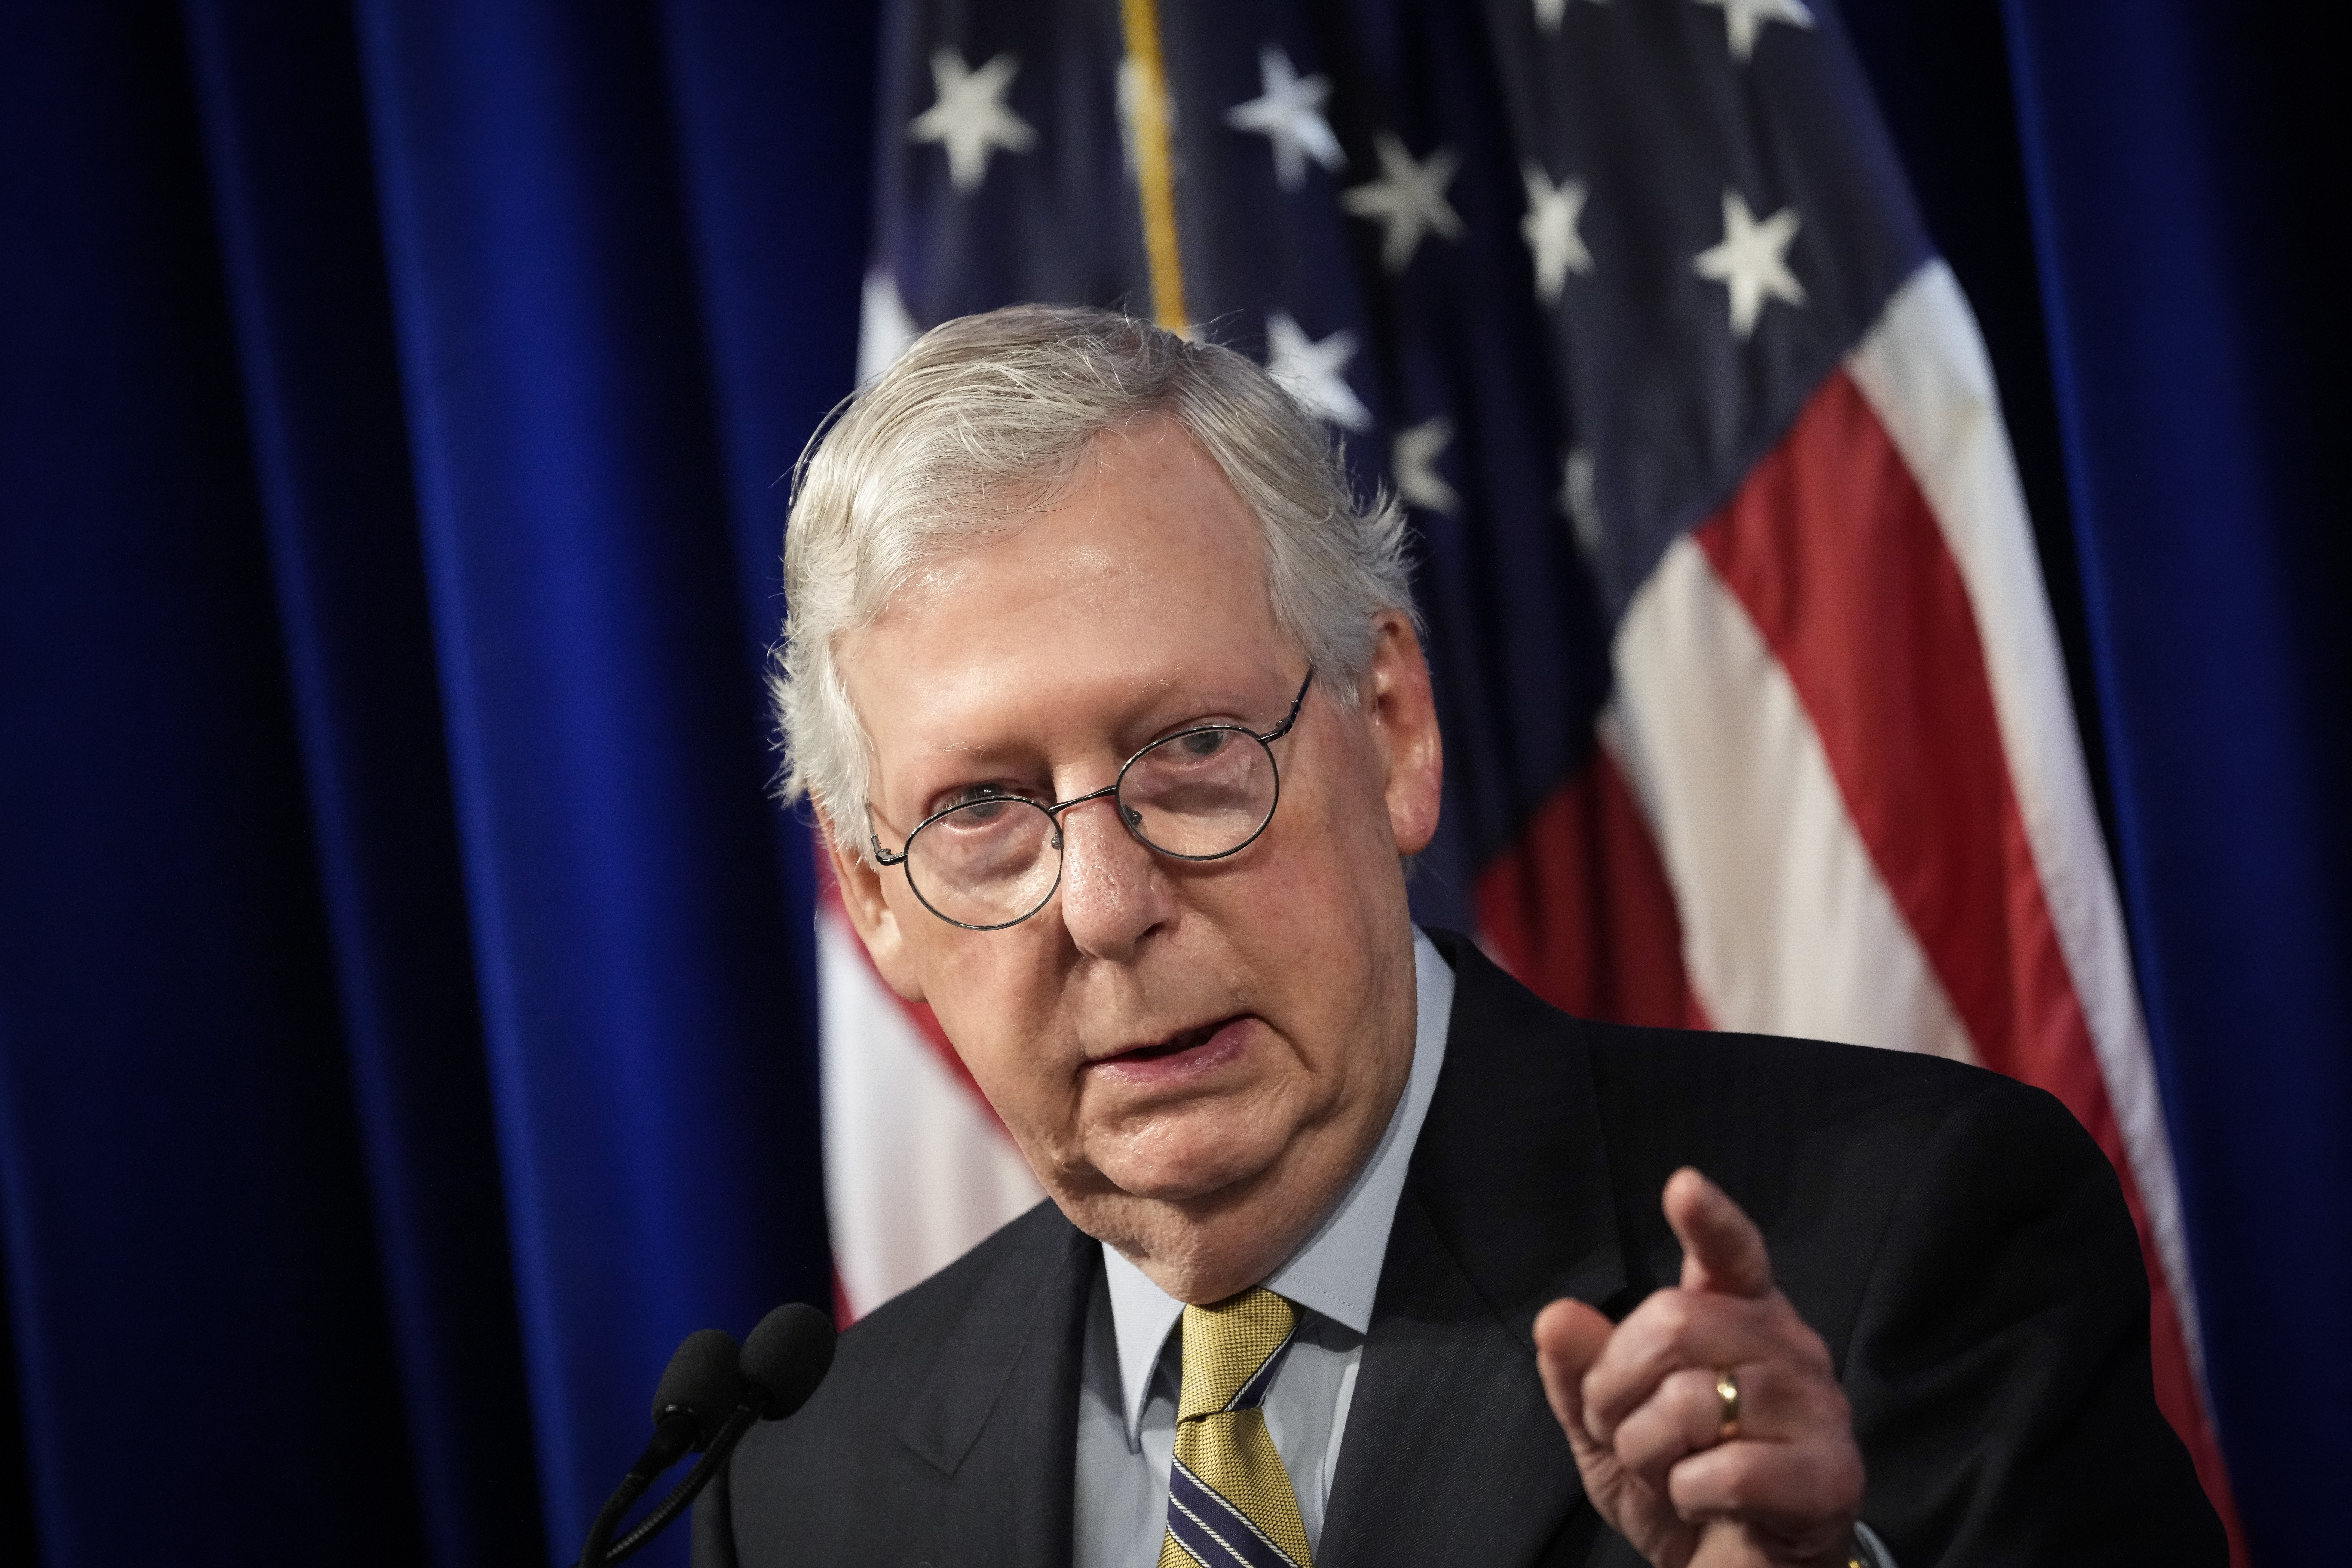 Senate Minority Leader Mitch McConnell speaks as he introduces Supreme Court Justice Clarence Thomas at the Heritage Foundation on Thursday. (Drew Angerer/Getty Images)